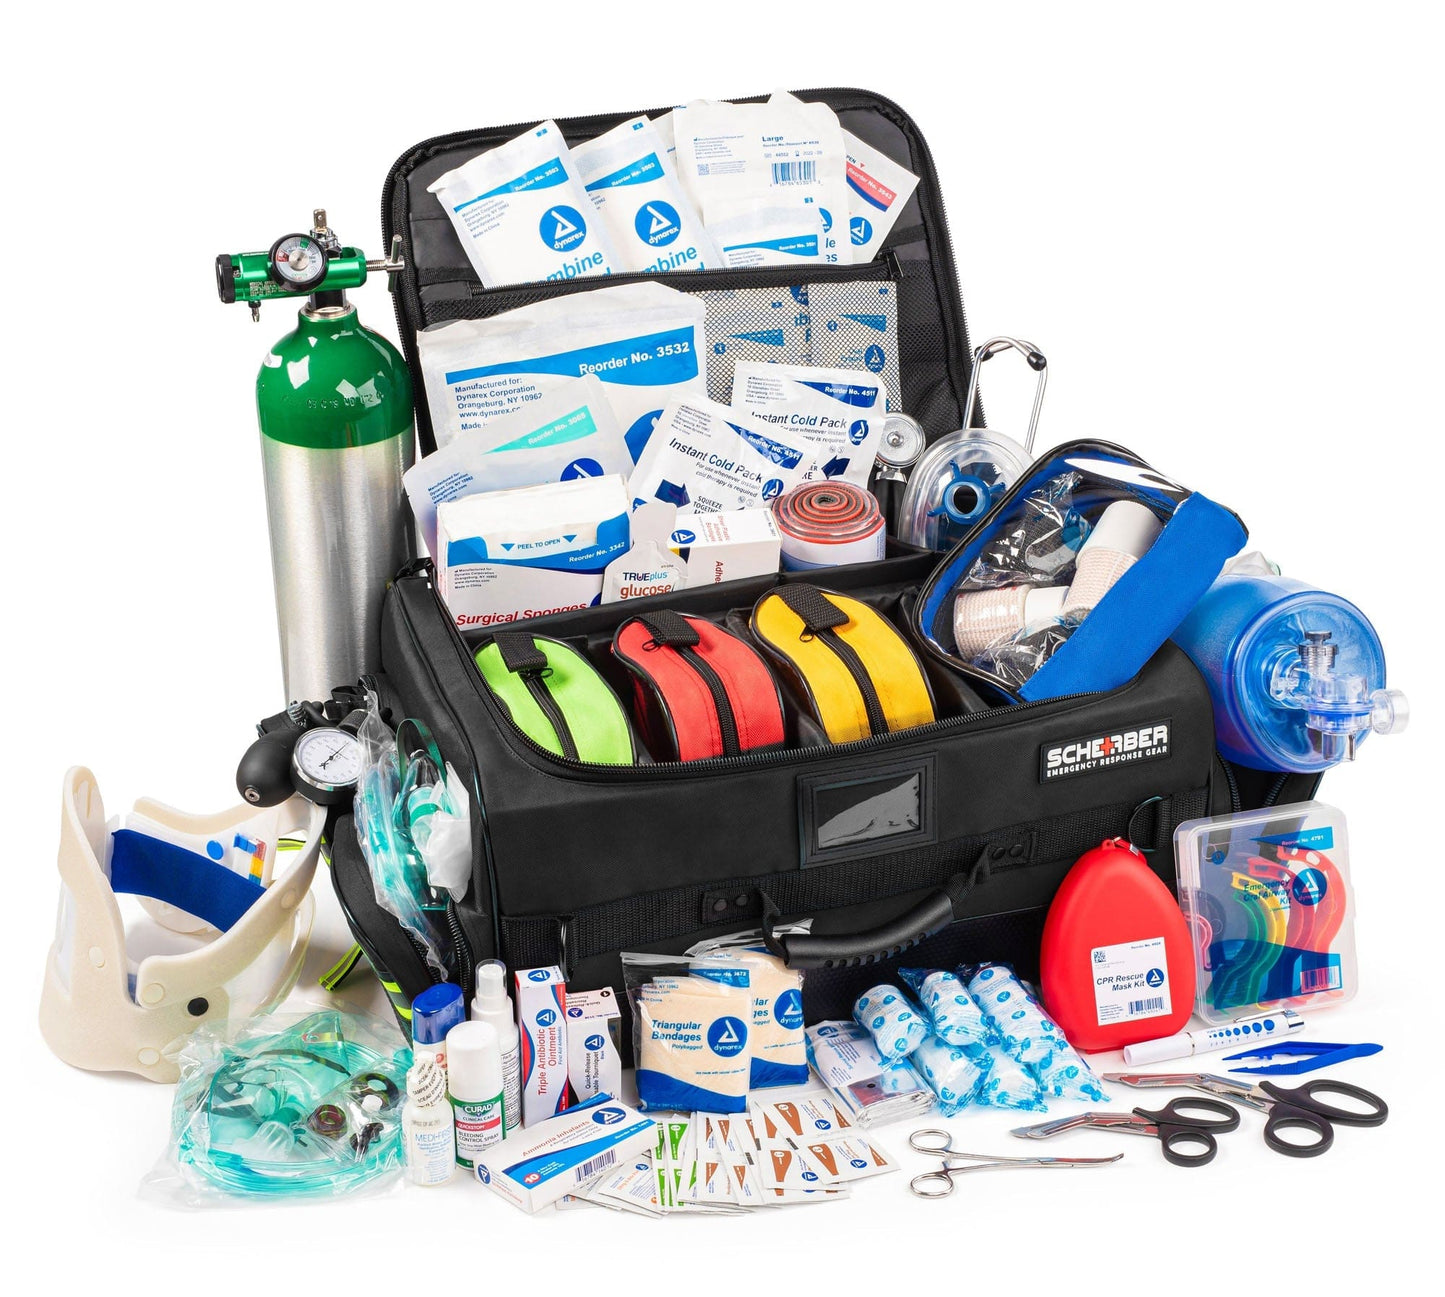 Chief Miller First Aid Kits Scherber Ultimate First Responder Trauma kit O2 - Fully Stocked Apparel